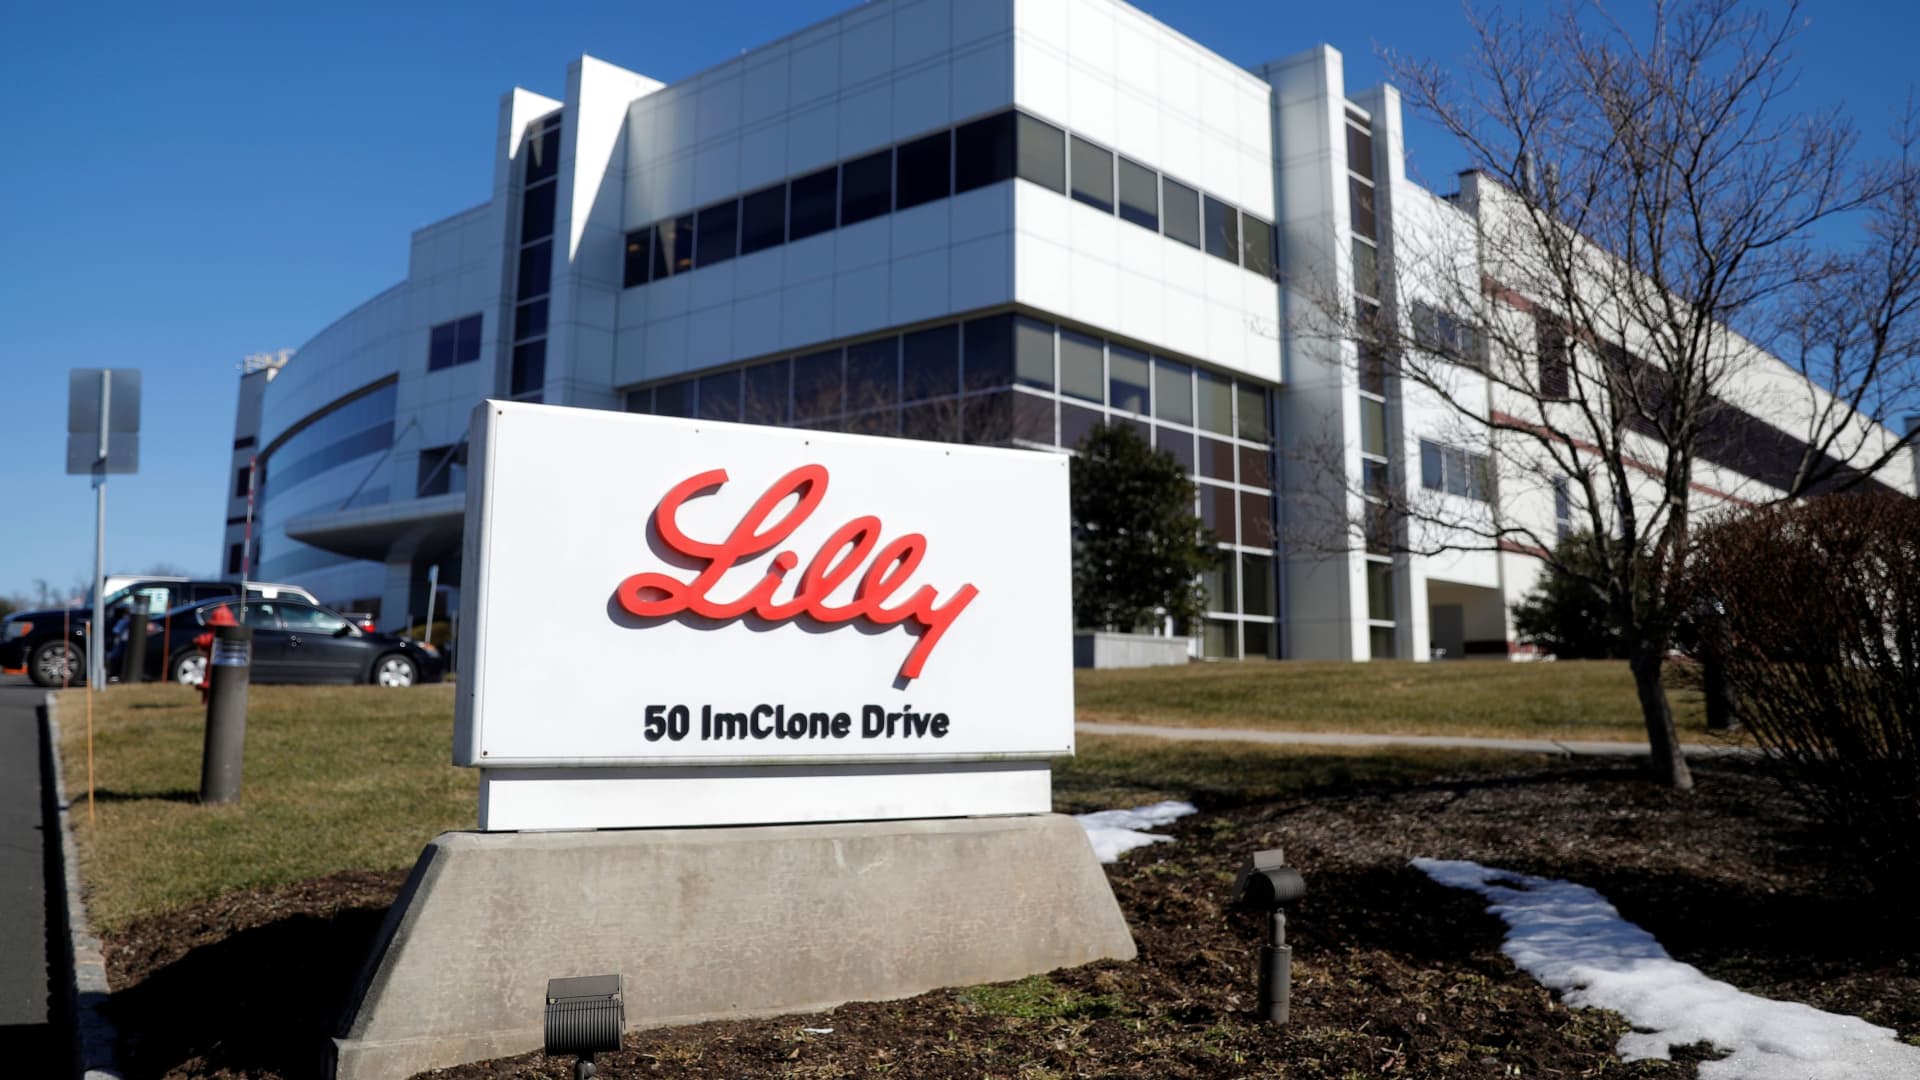 An Eli Lilly and Company pharmaceutical manufacturing plant is pictured in Branchburg, New Jersey, on March 5, 2021.